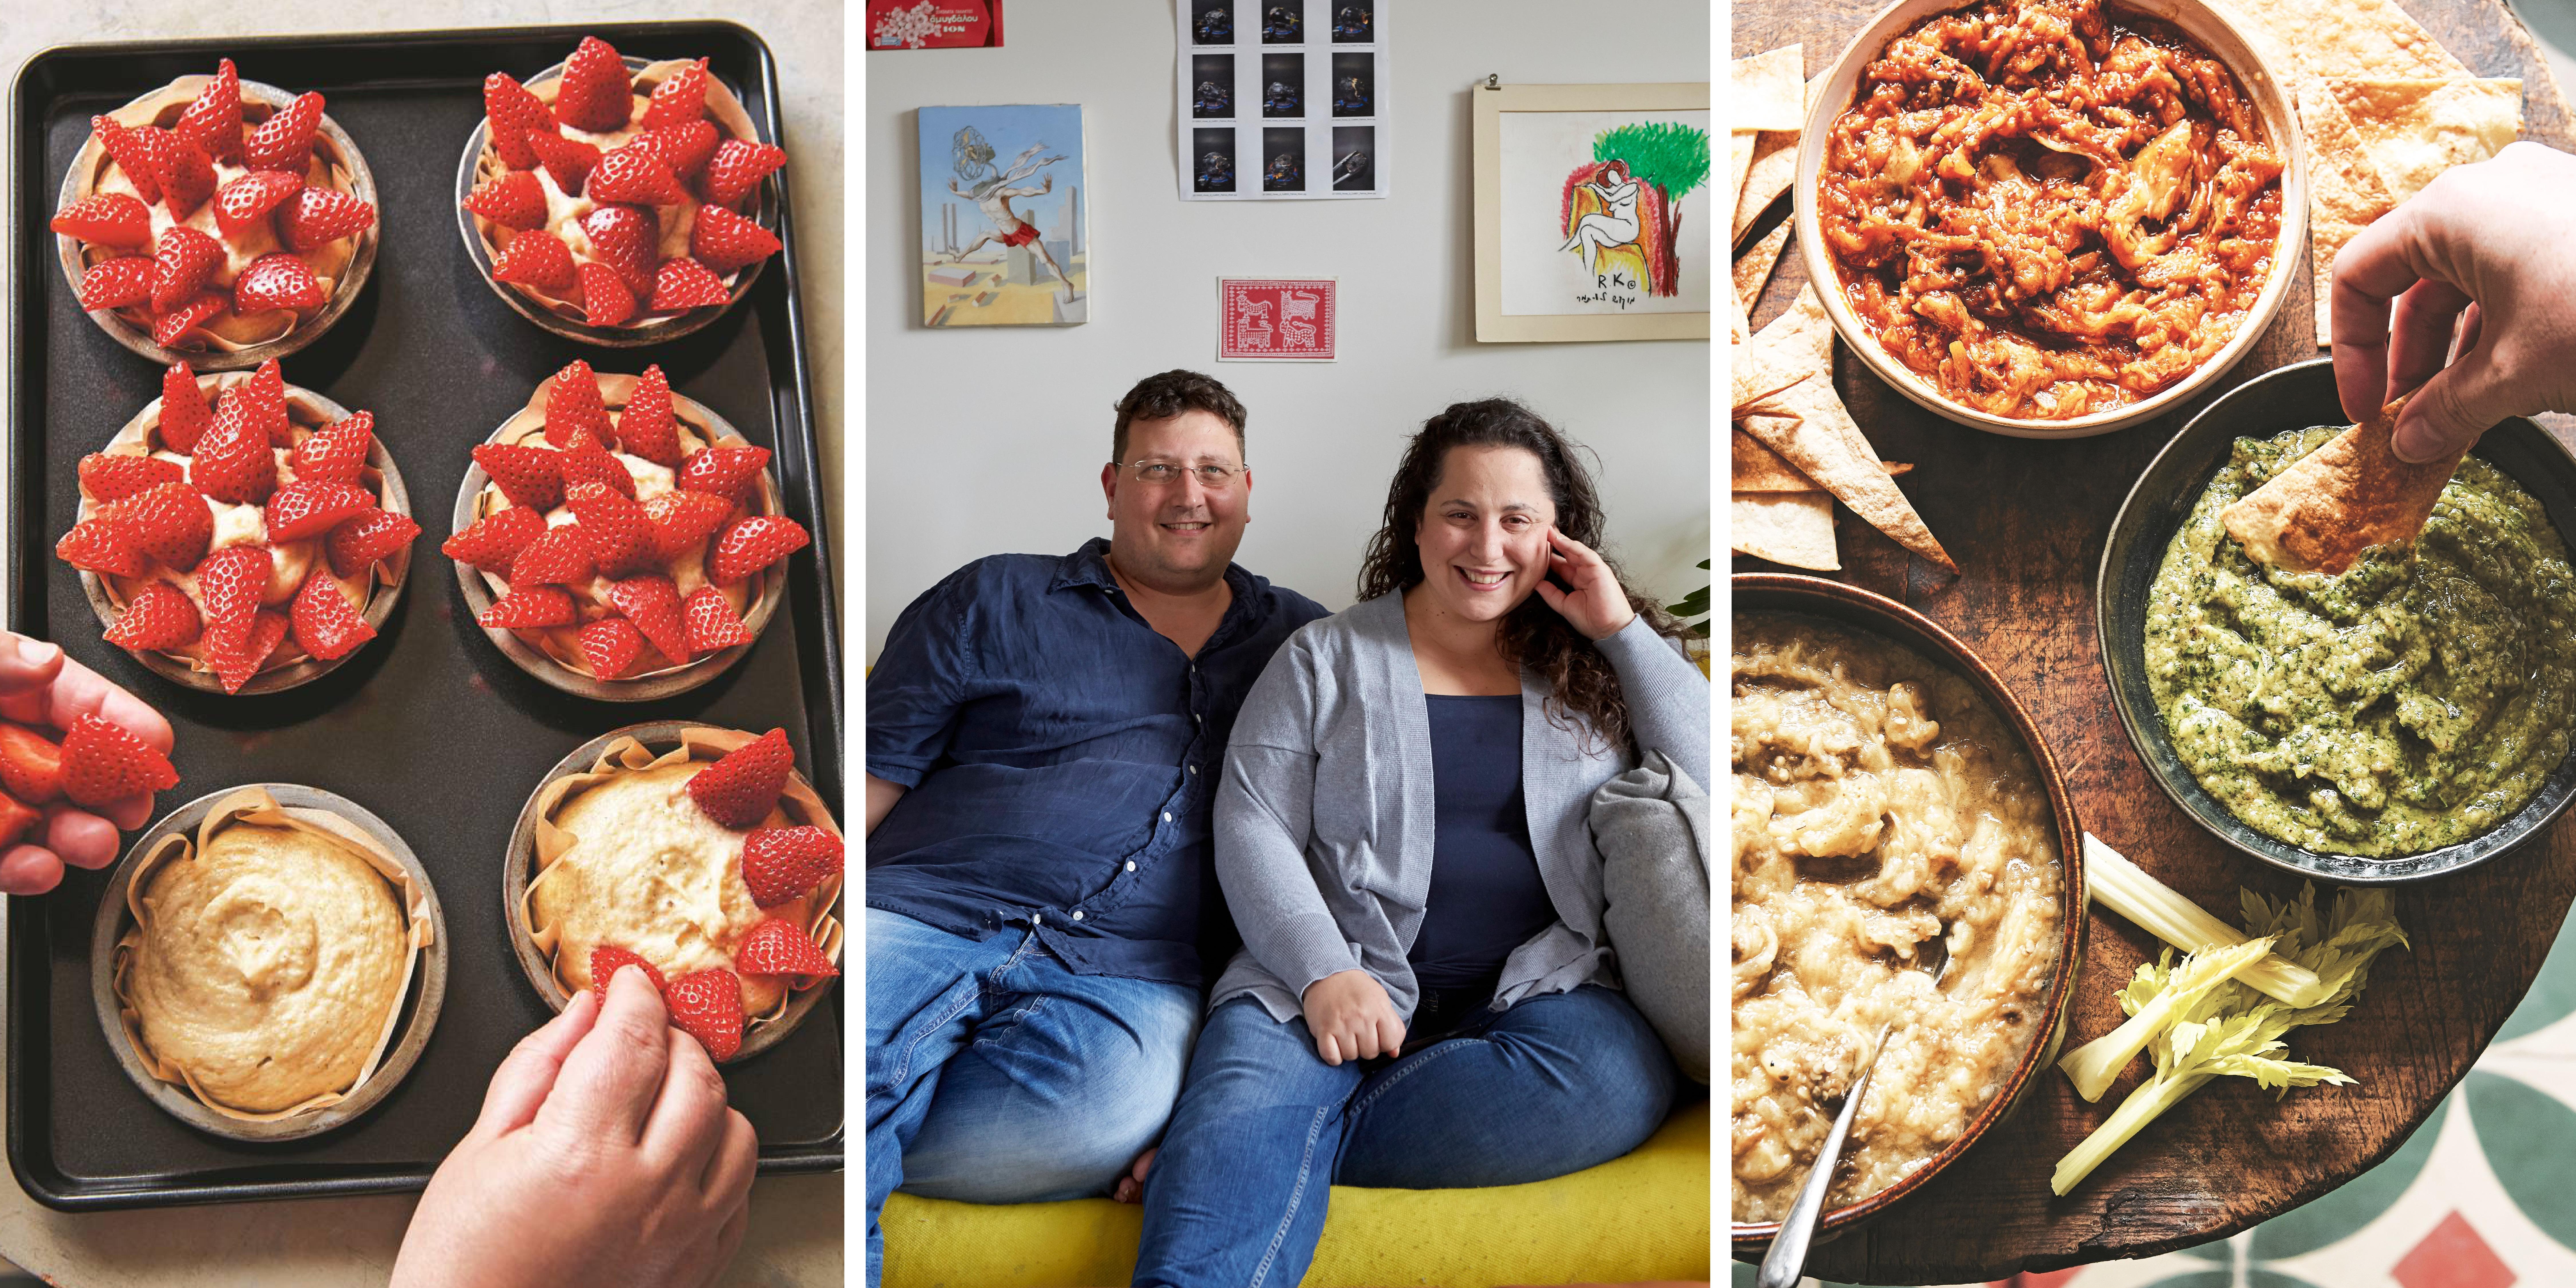 A Middle Eastern Feast with Sarit Packer and Itamar Srulovich of Honey & Co.